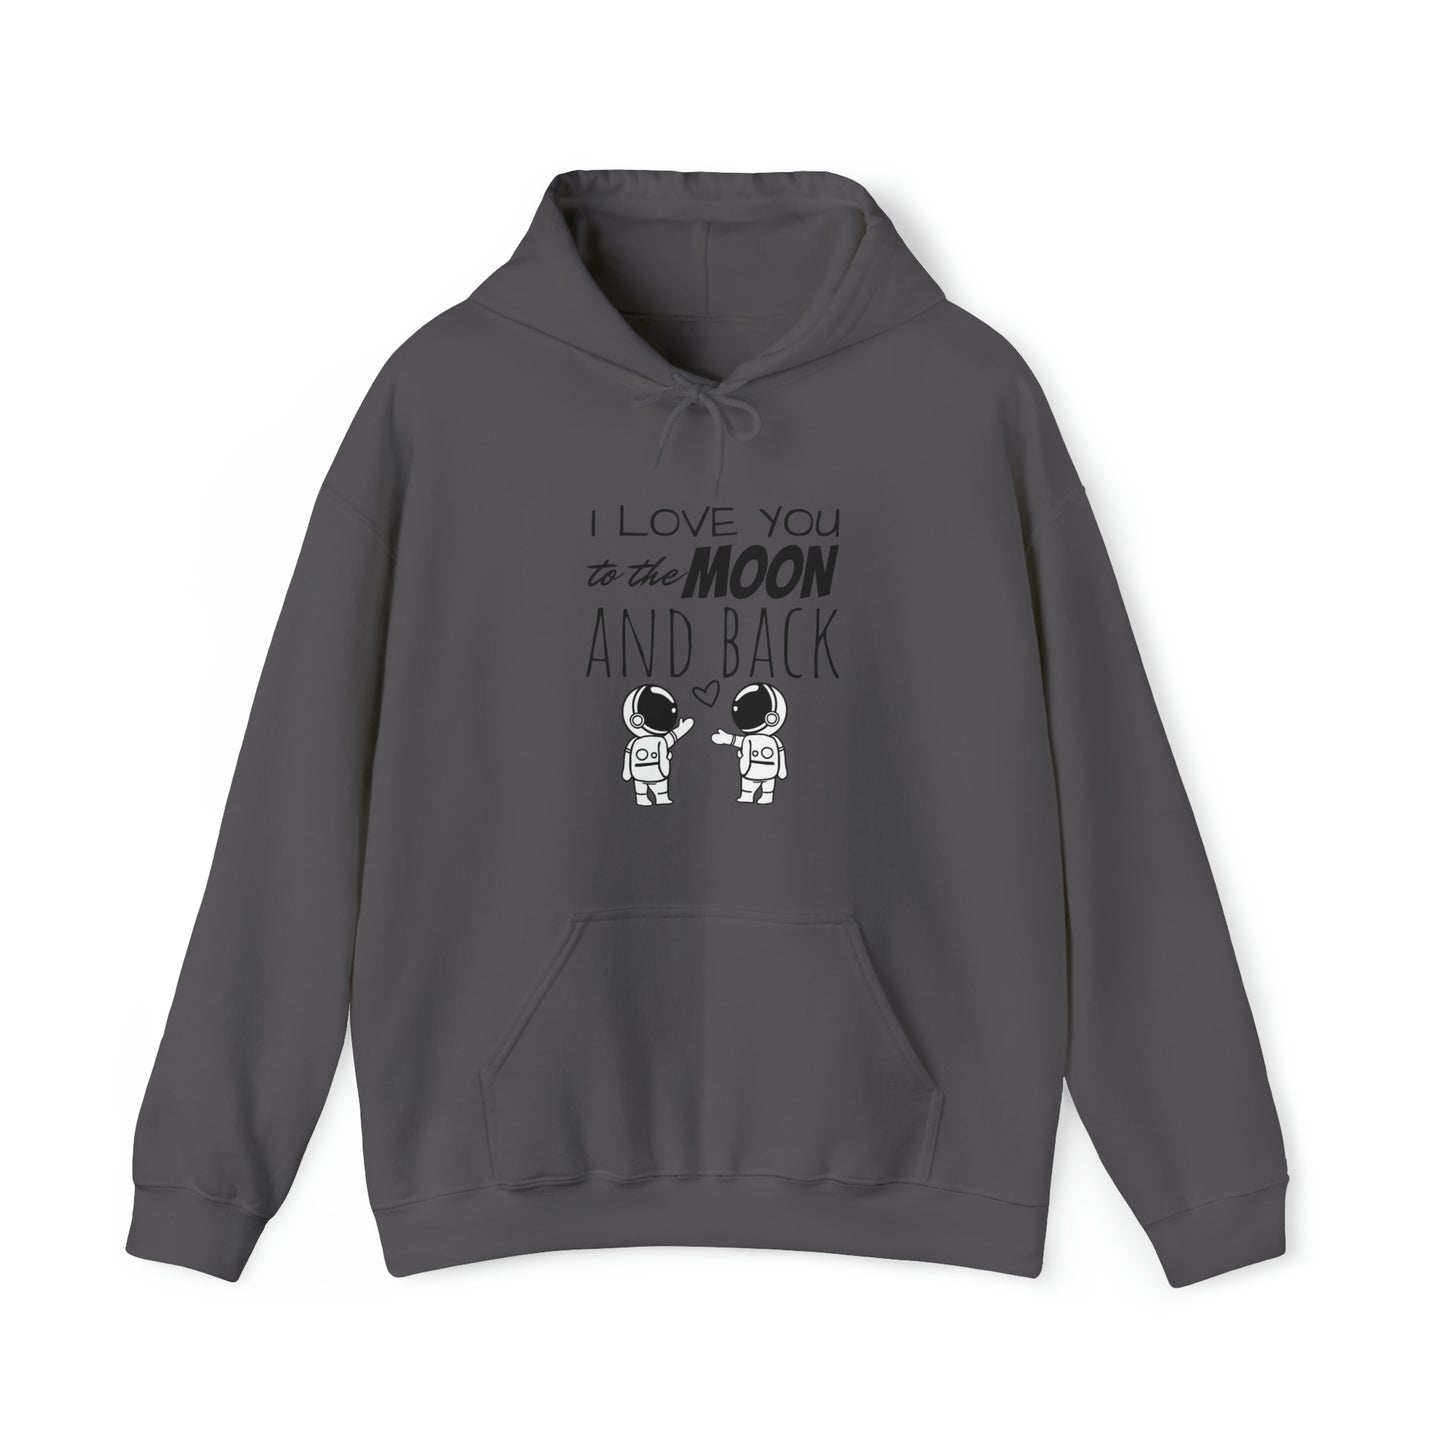 To the Moon - Astronaut Hoodie